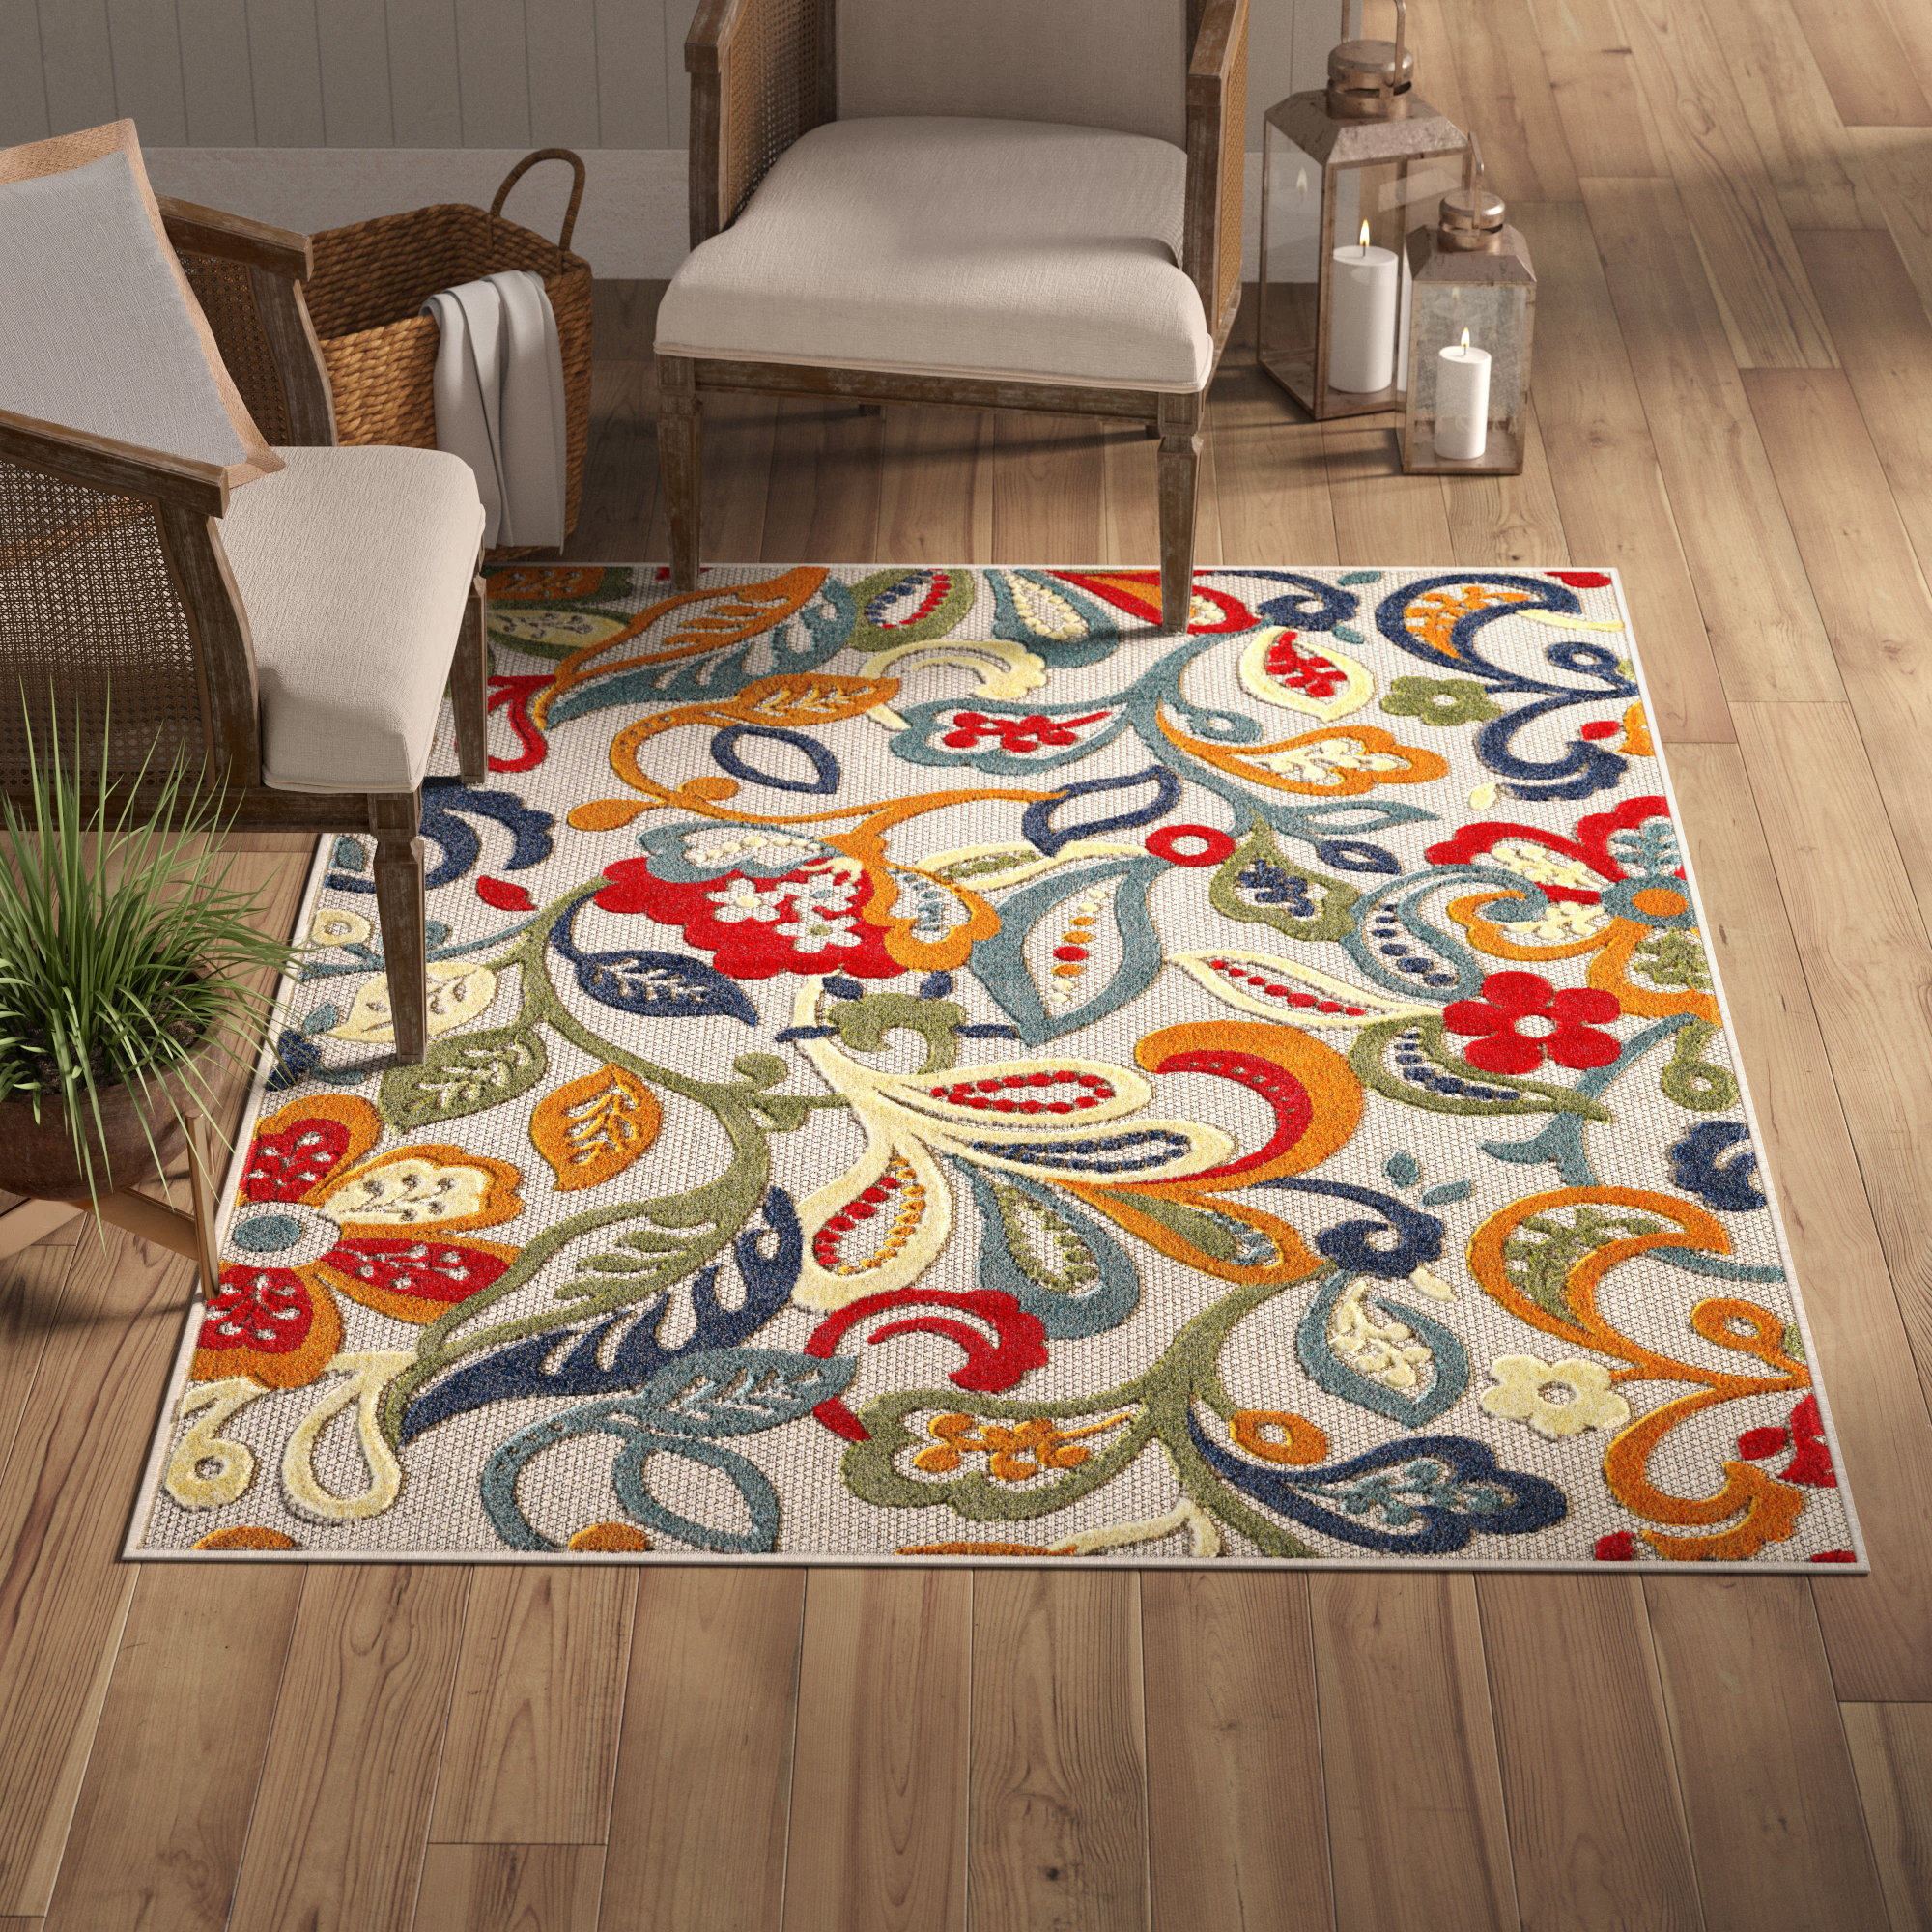 Gahanna Floral Indoor / Outdoor Area Rug in Blue/Red/Yellow